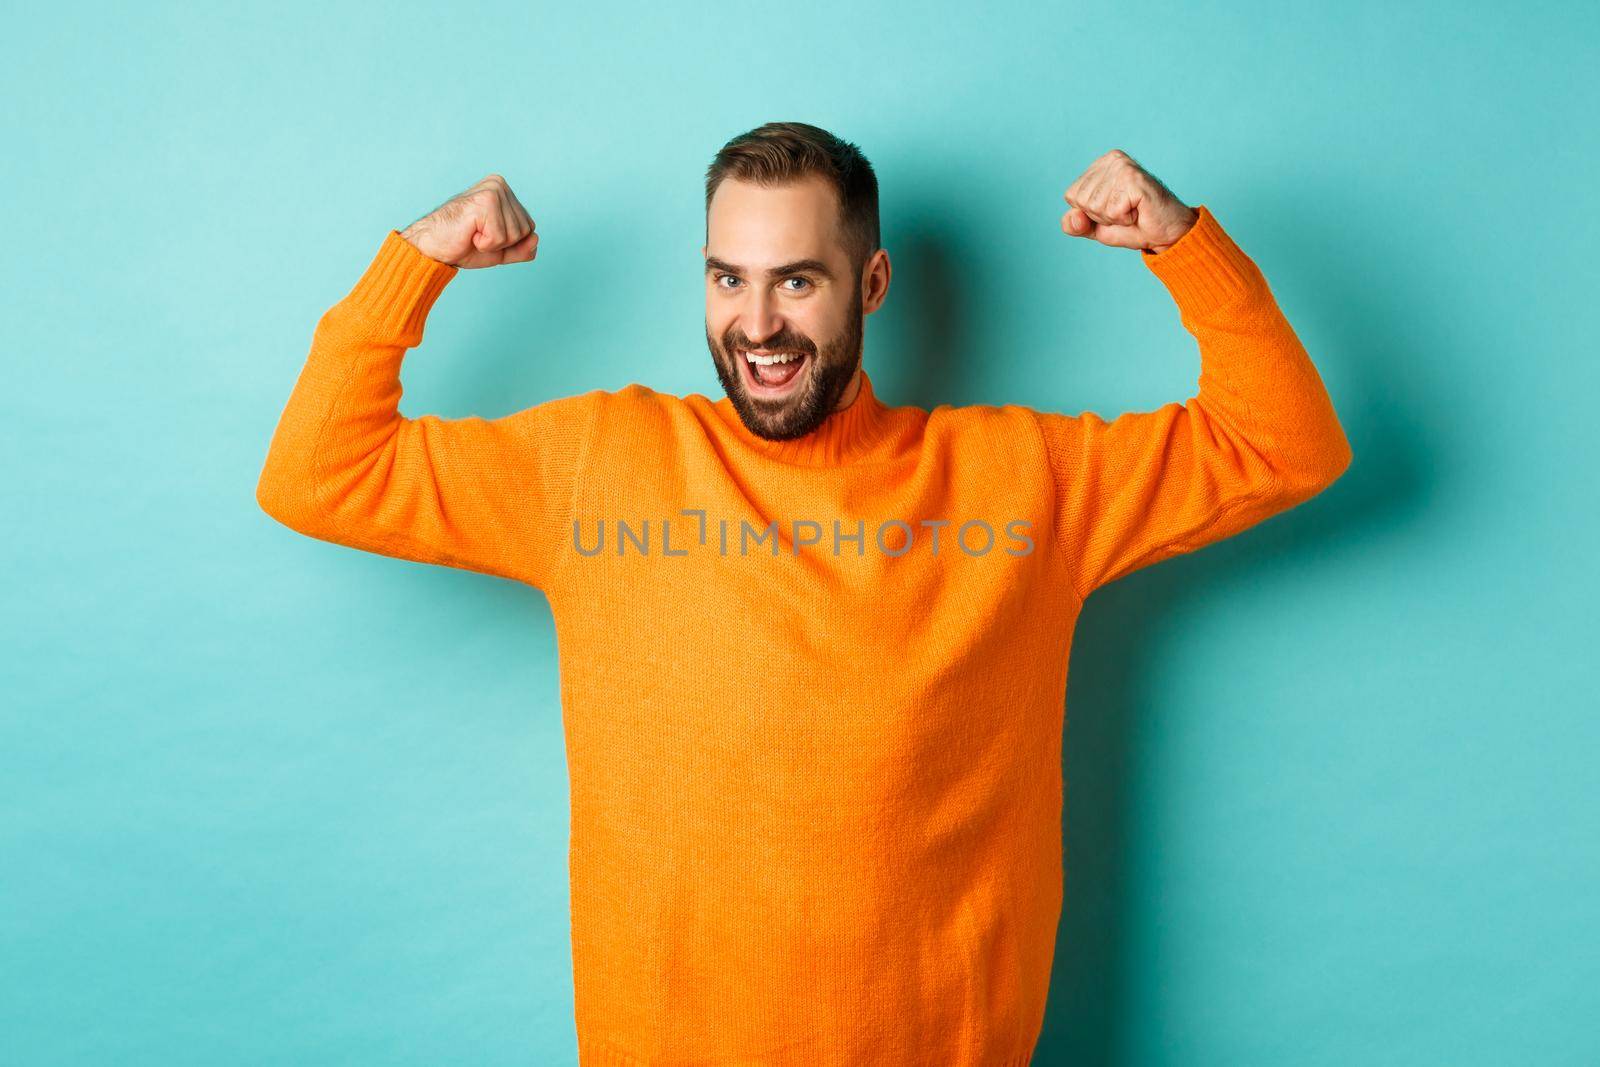 Young and strong man looking confident, flex biceps and show-off muscle strengths, smiling self-assured, standing over light blue background.